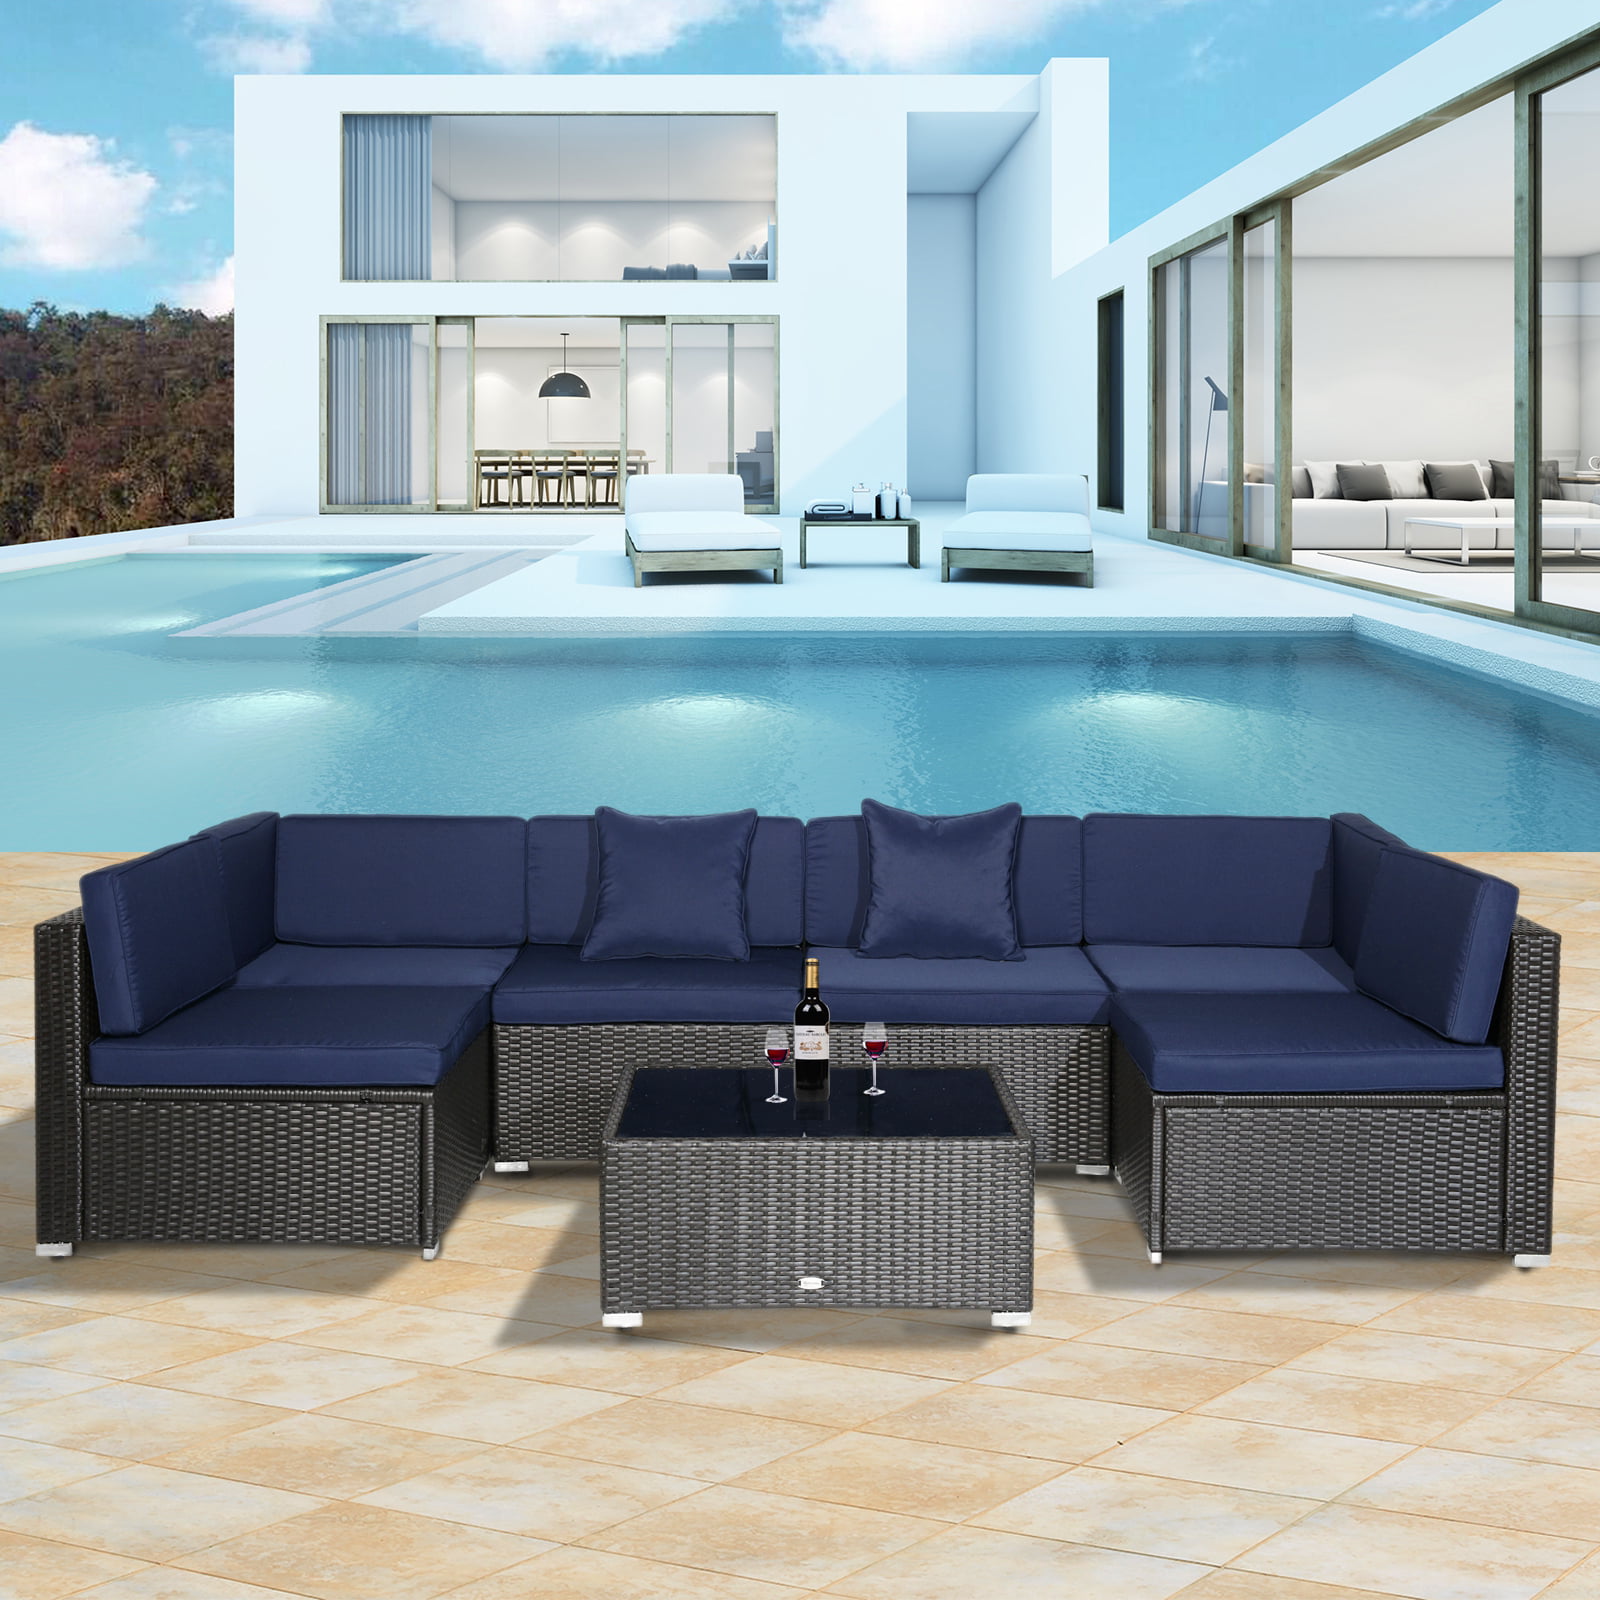 Outsunny 7pc Garden Wicker Sectional Set Outdoor Rattan Lounge Sofa with Cushion Patio Deck Furniture All Weather Grey 